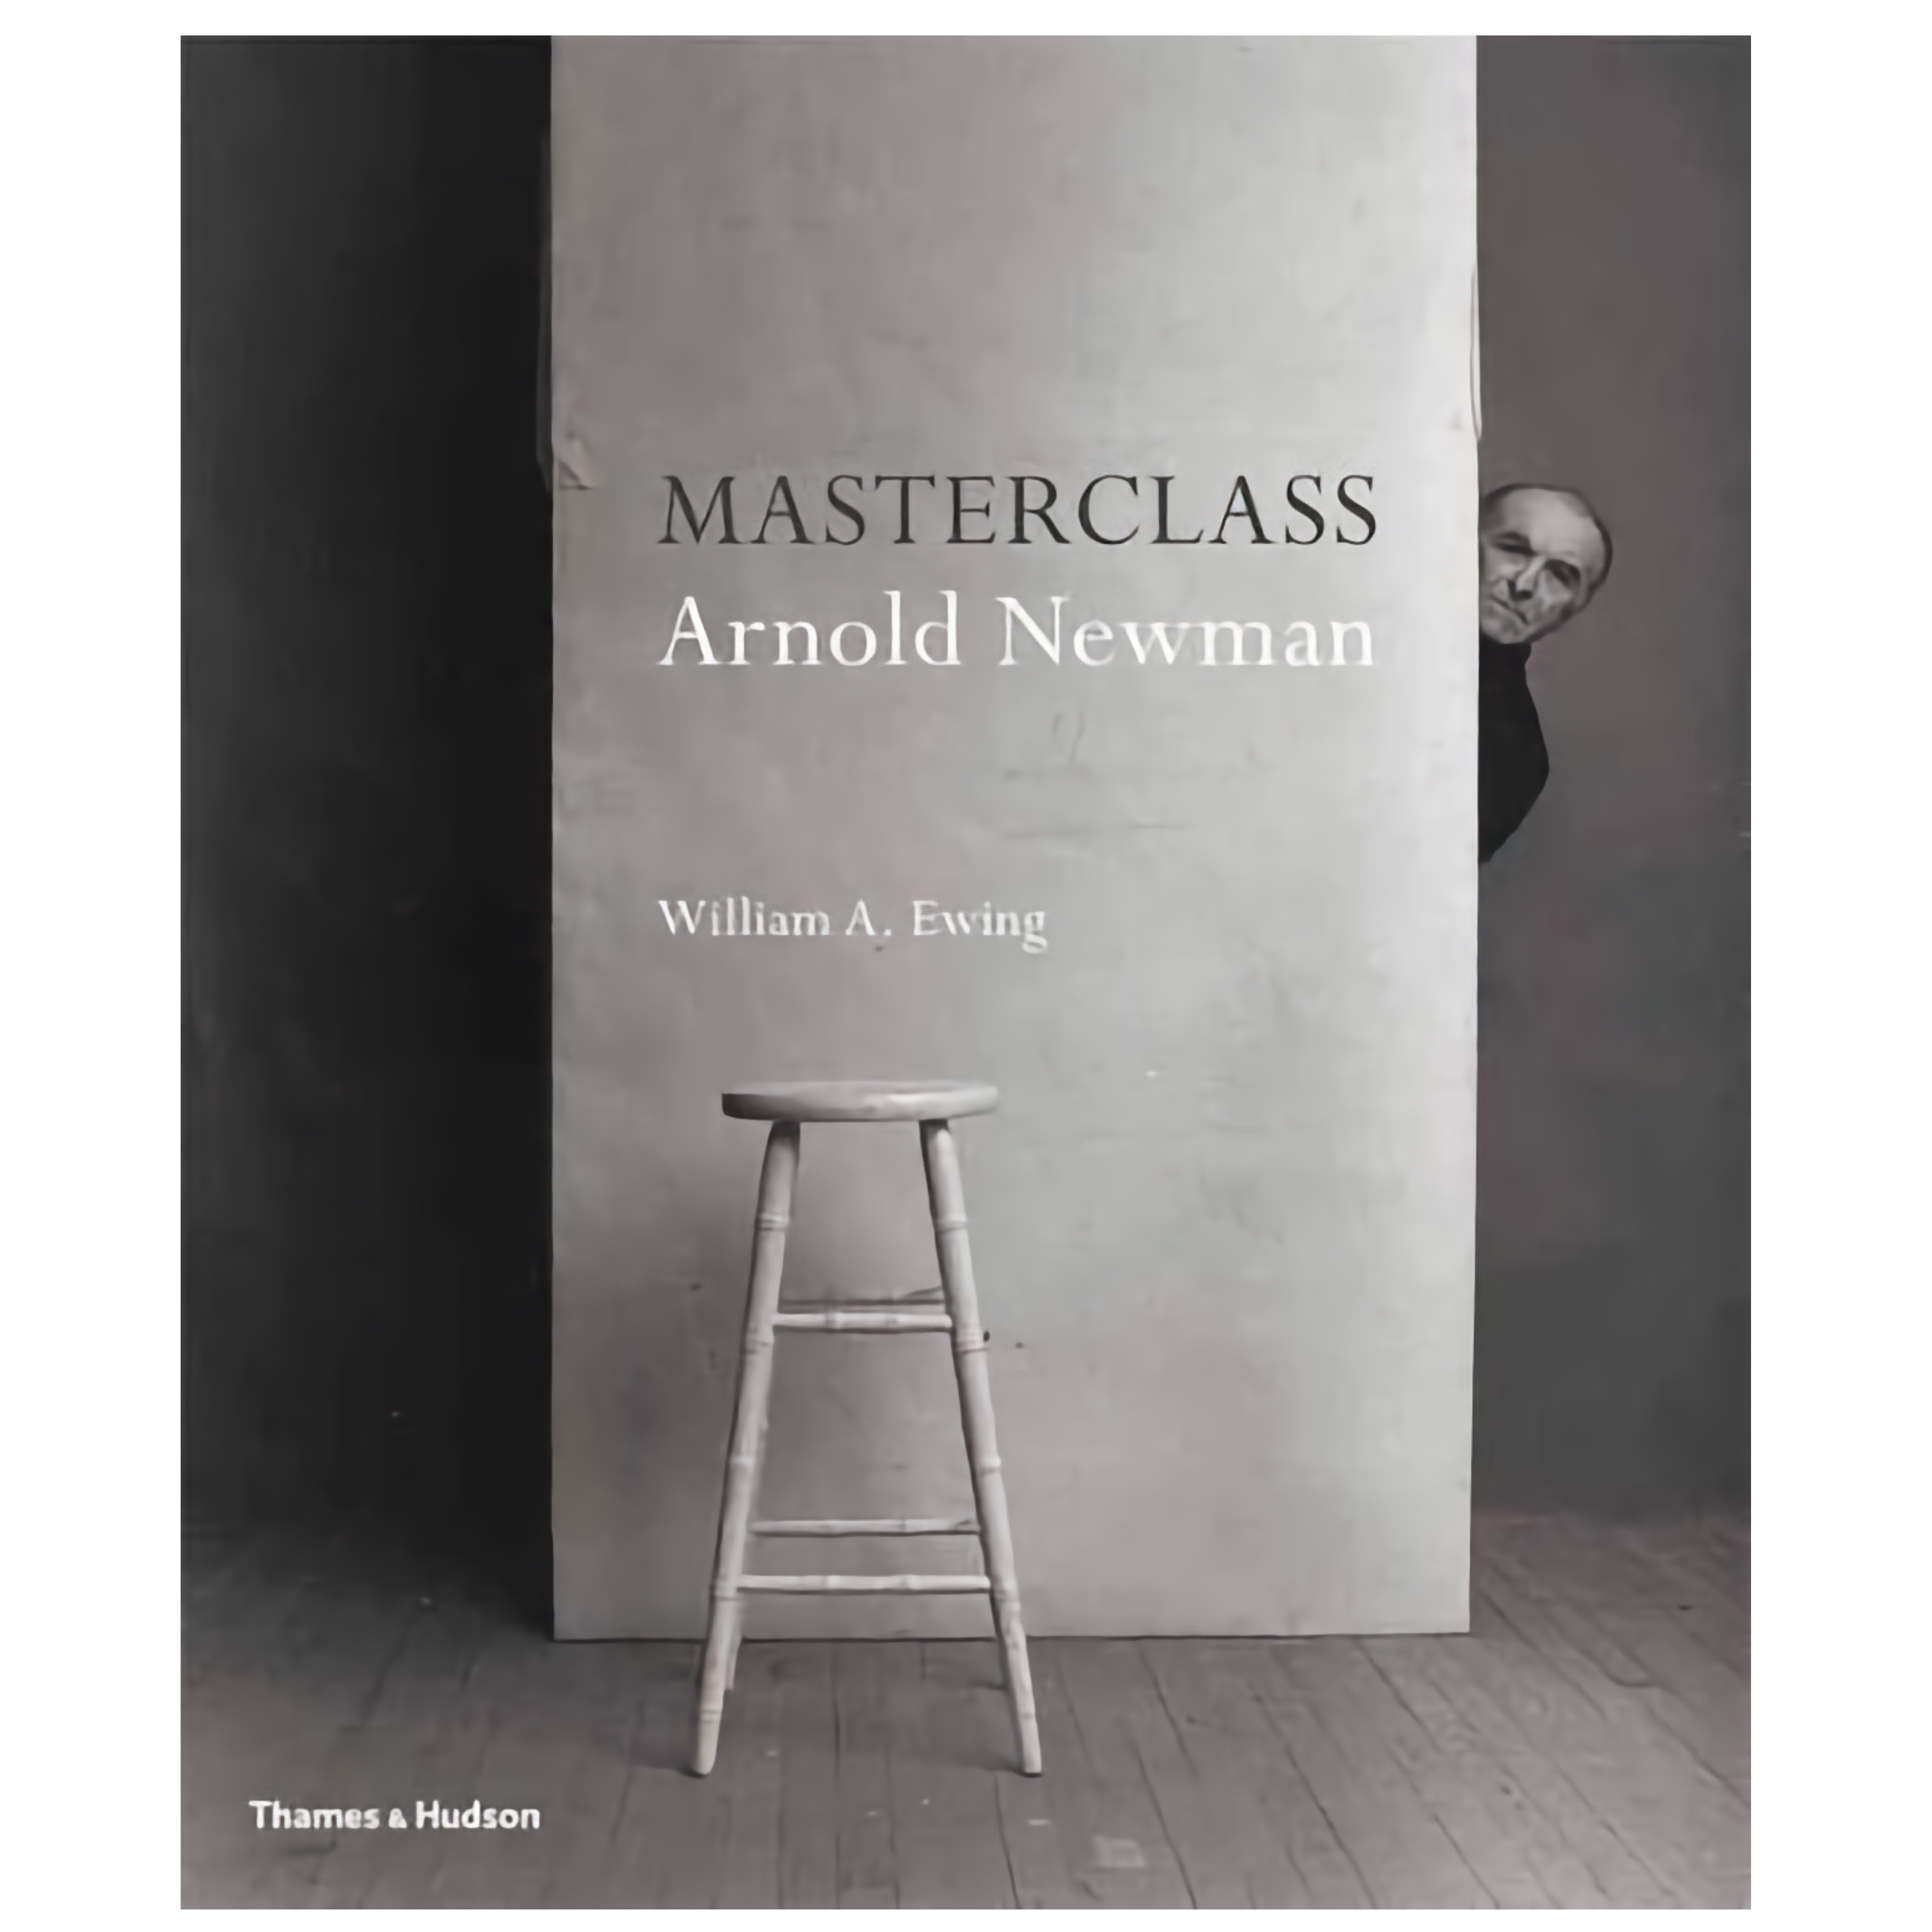 TThumbnail image for Arnold Newman - Masterclass